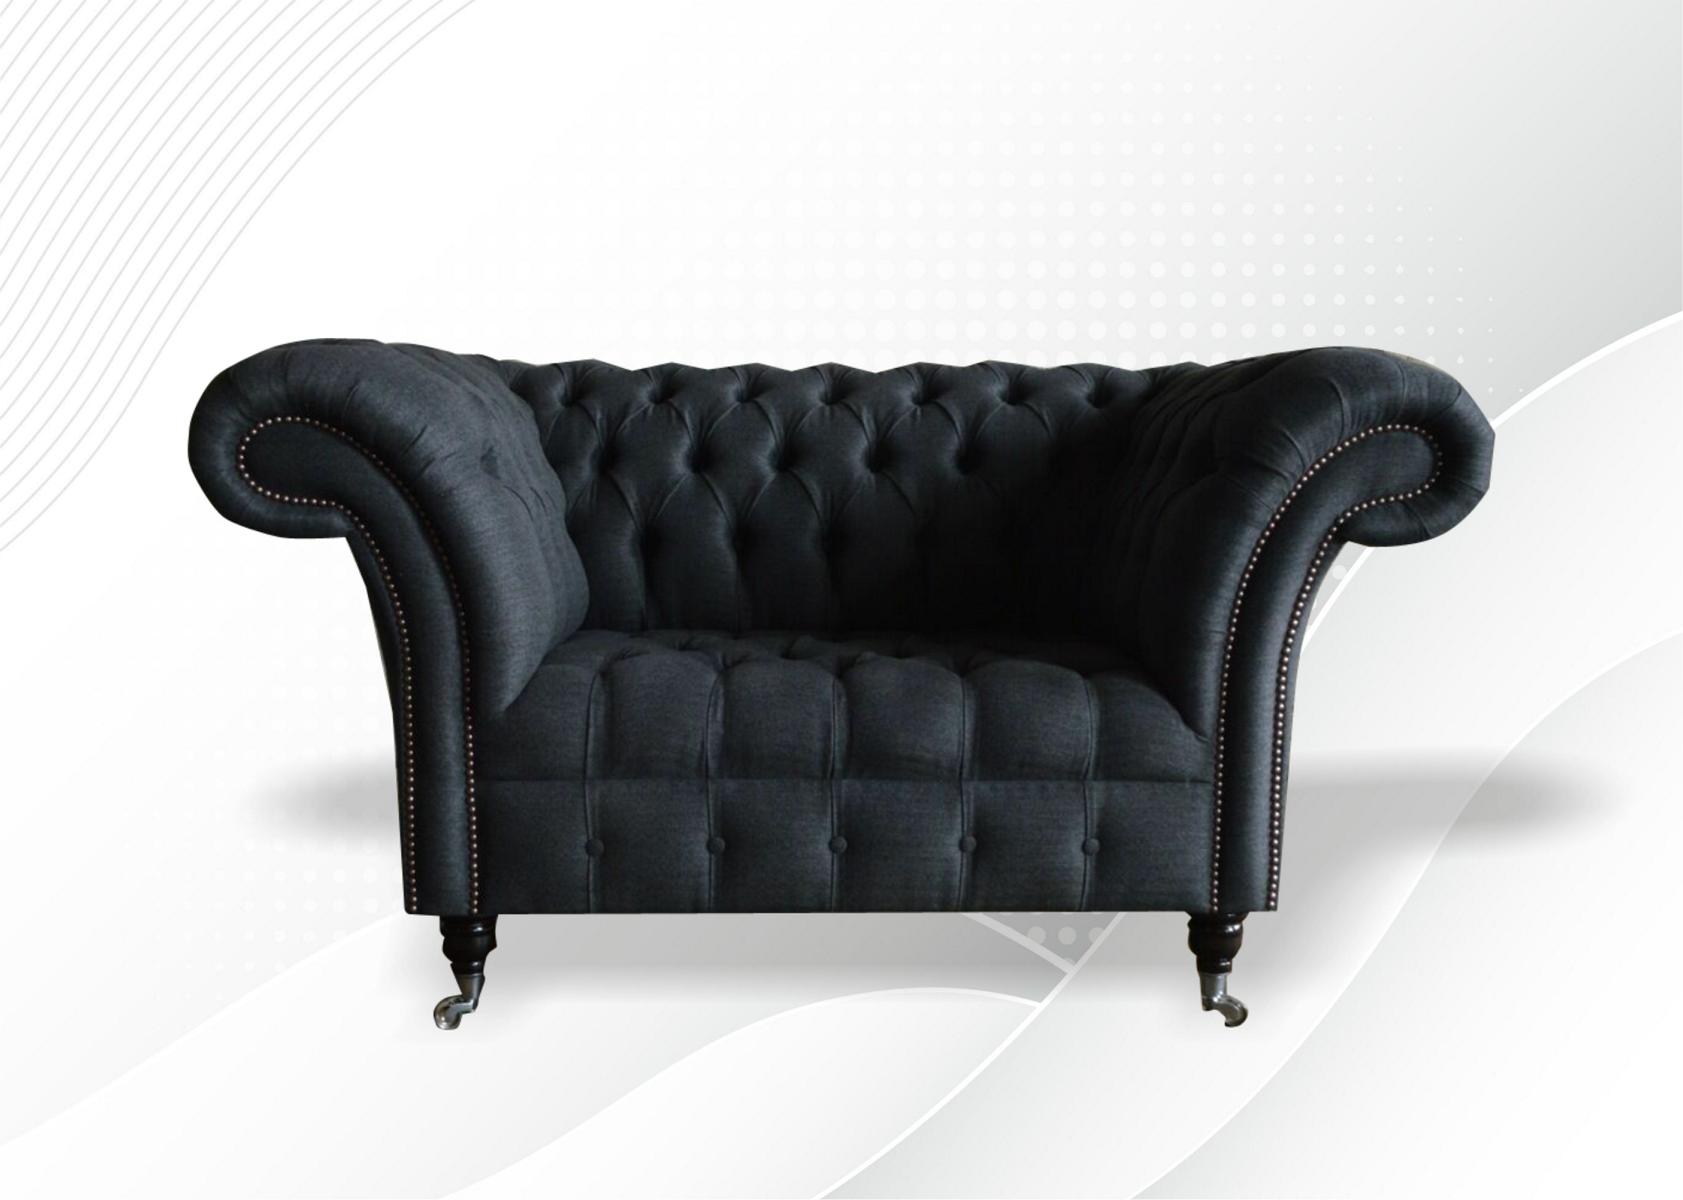 Sofa Chesterfield Sessel Fernseh Couch 1 Sitzer Textil Stoff Ohrensessel